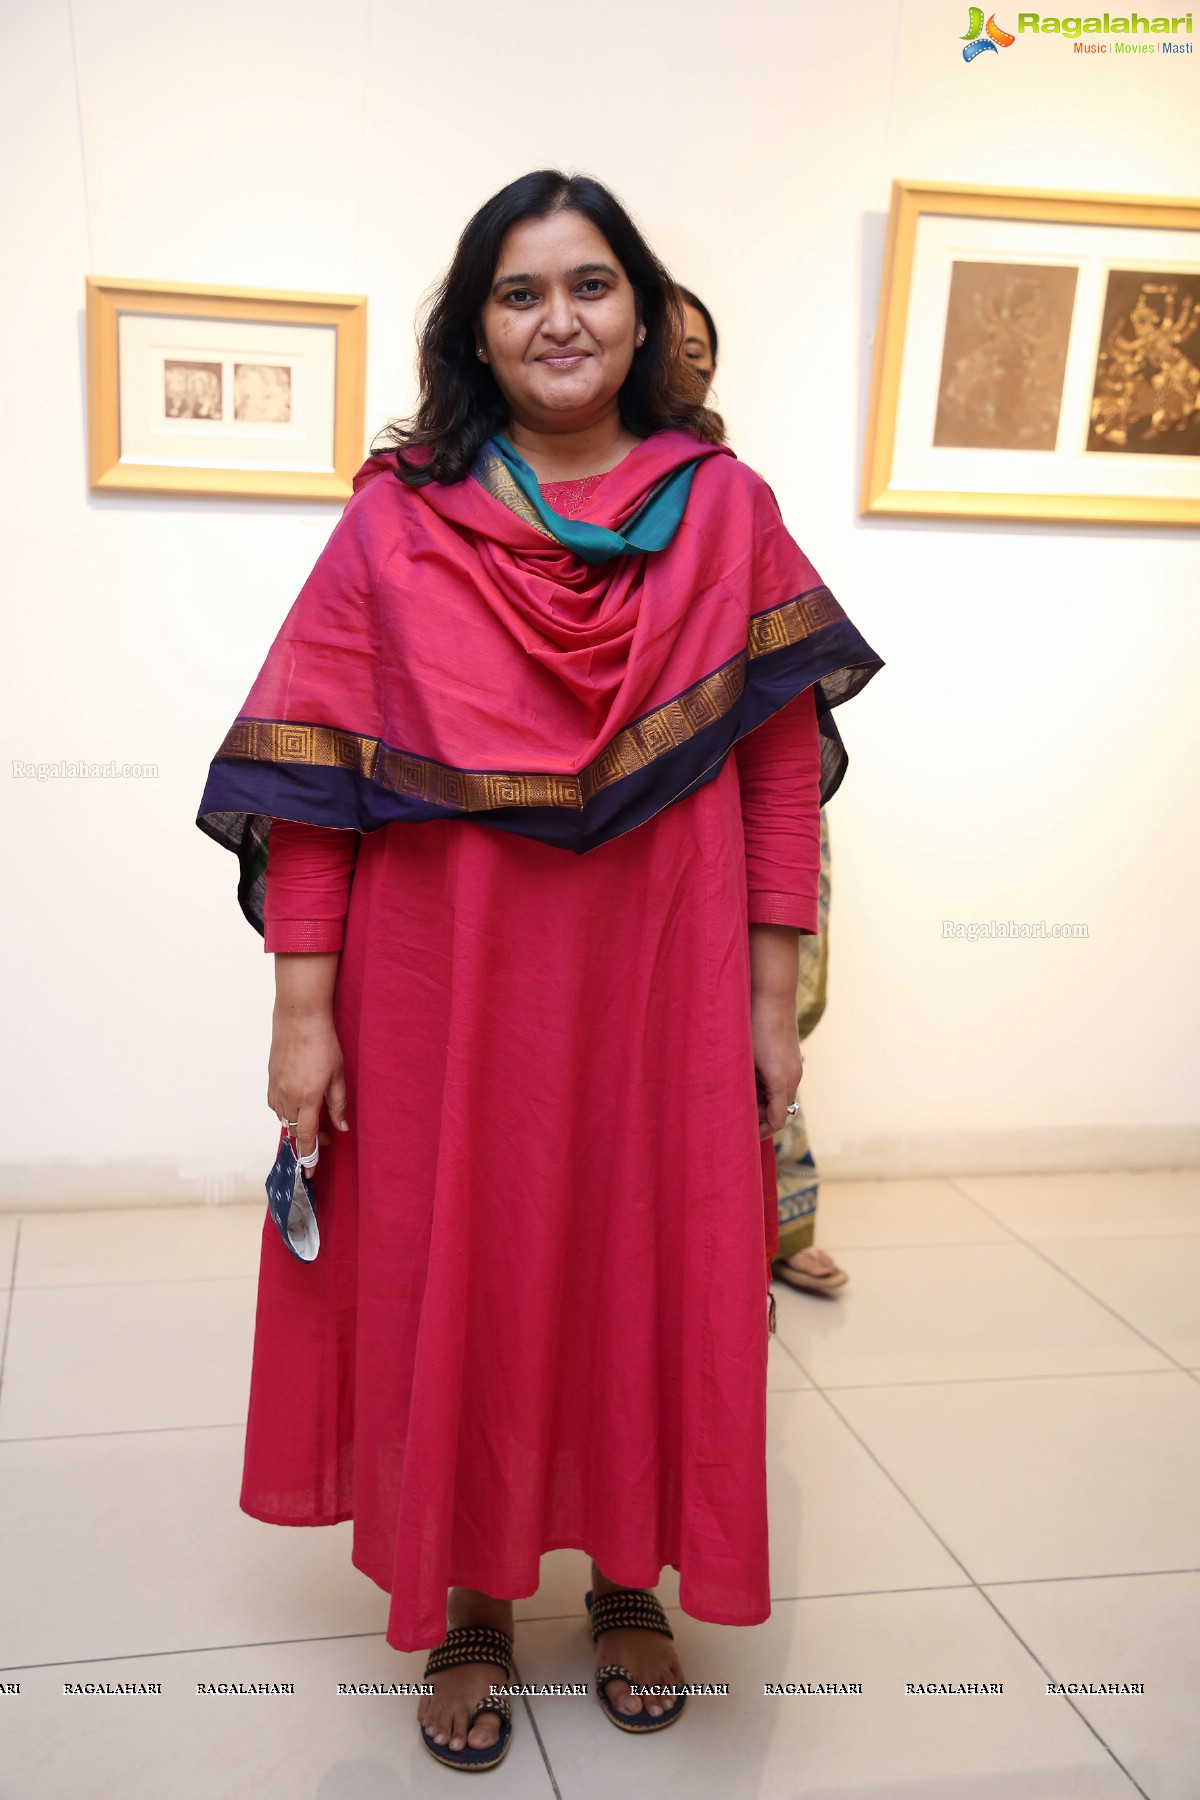 Exhibition Of Intaglio - Painting Exhibition at Chitramayee State Art Gallery